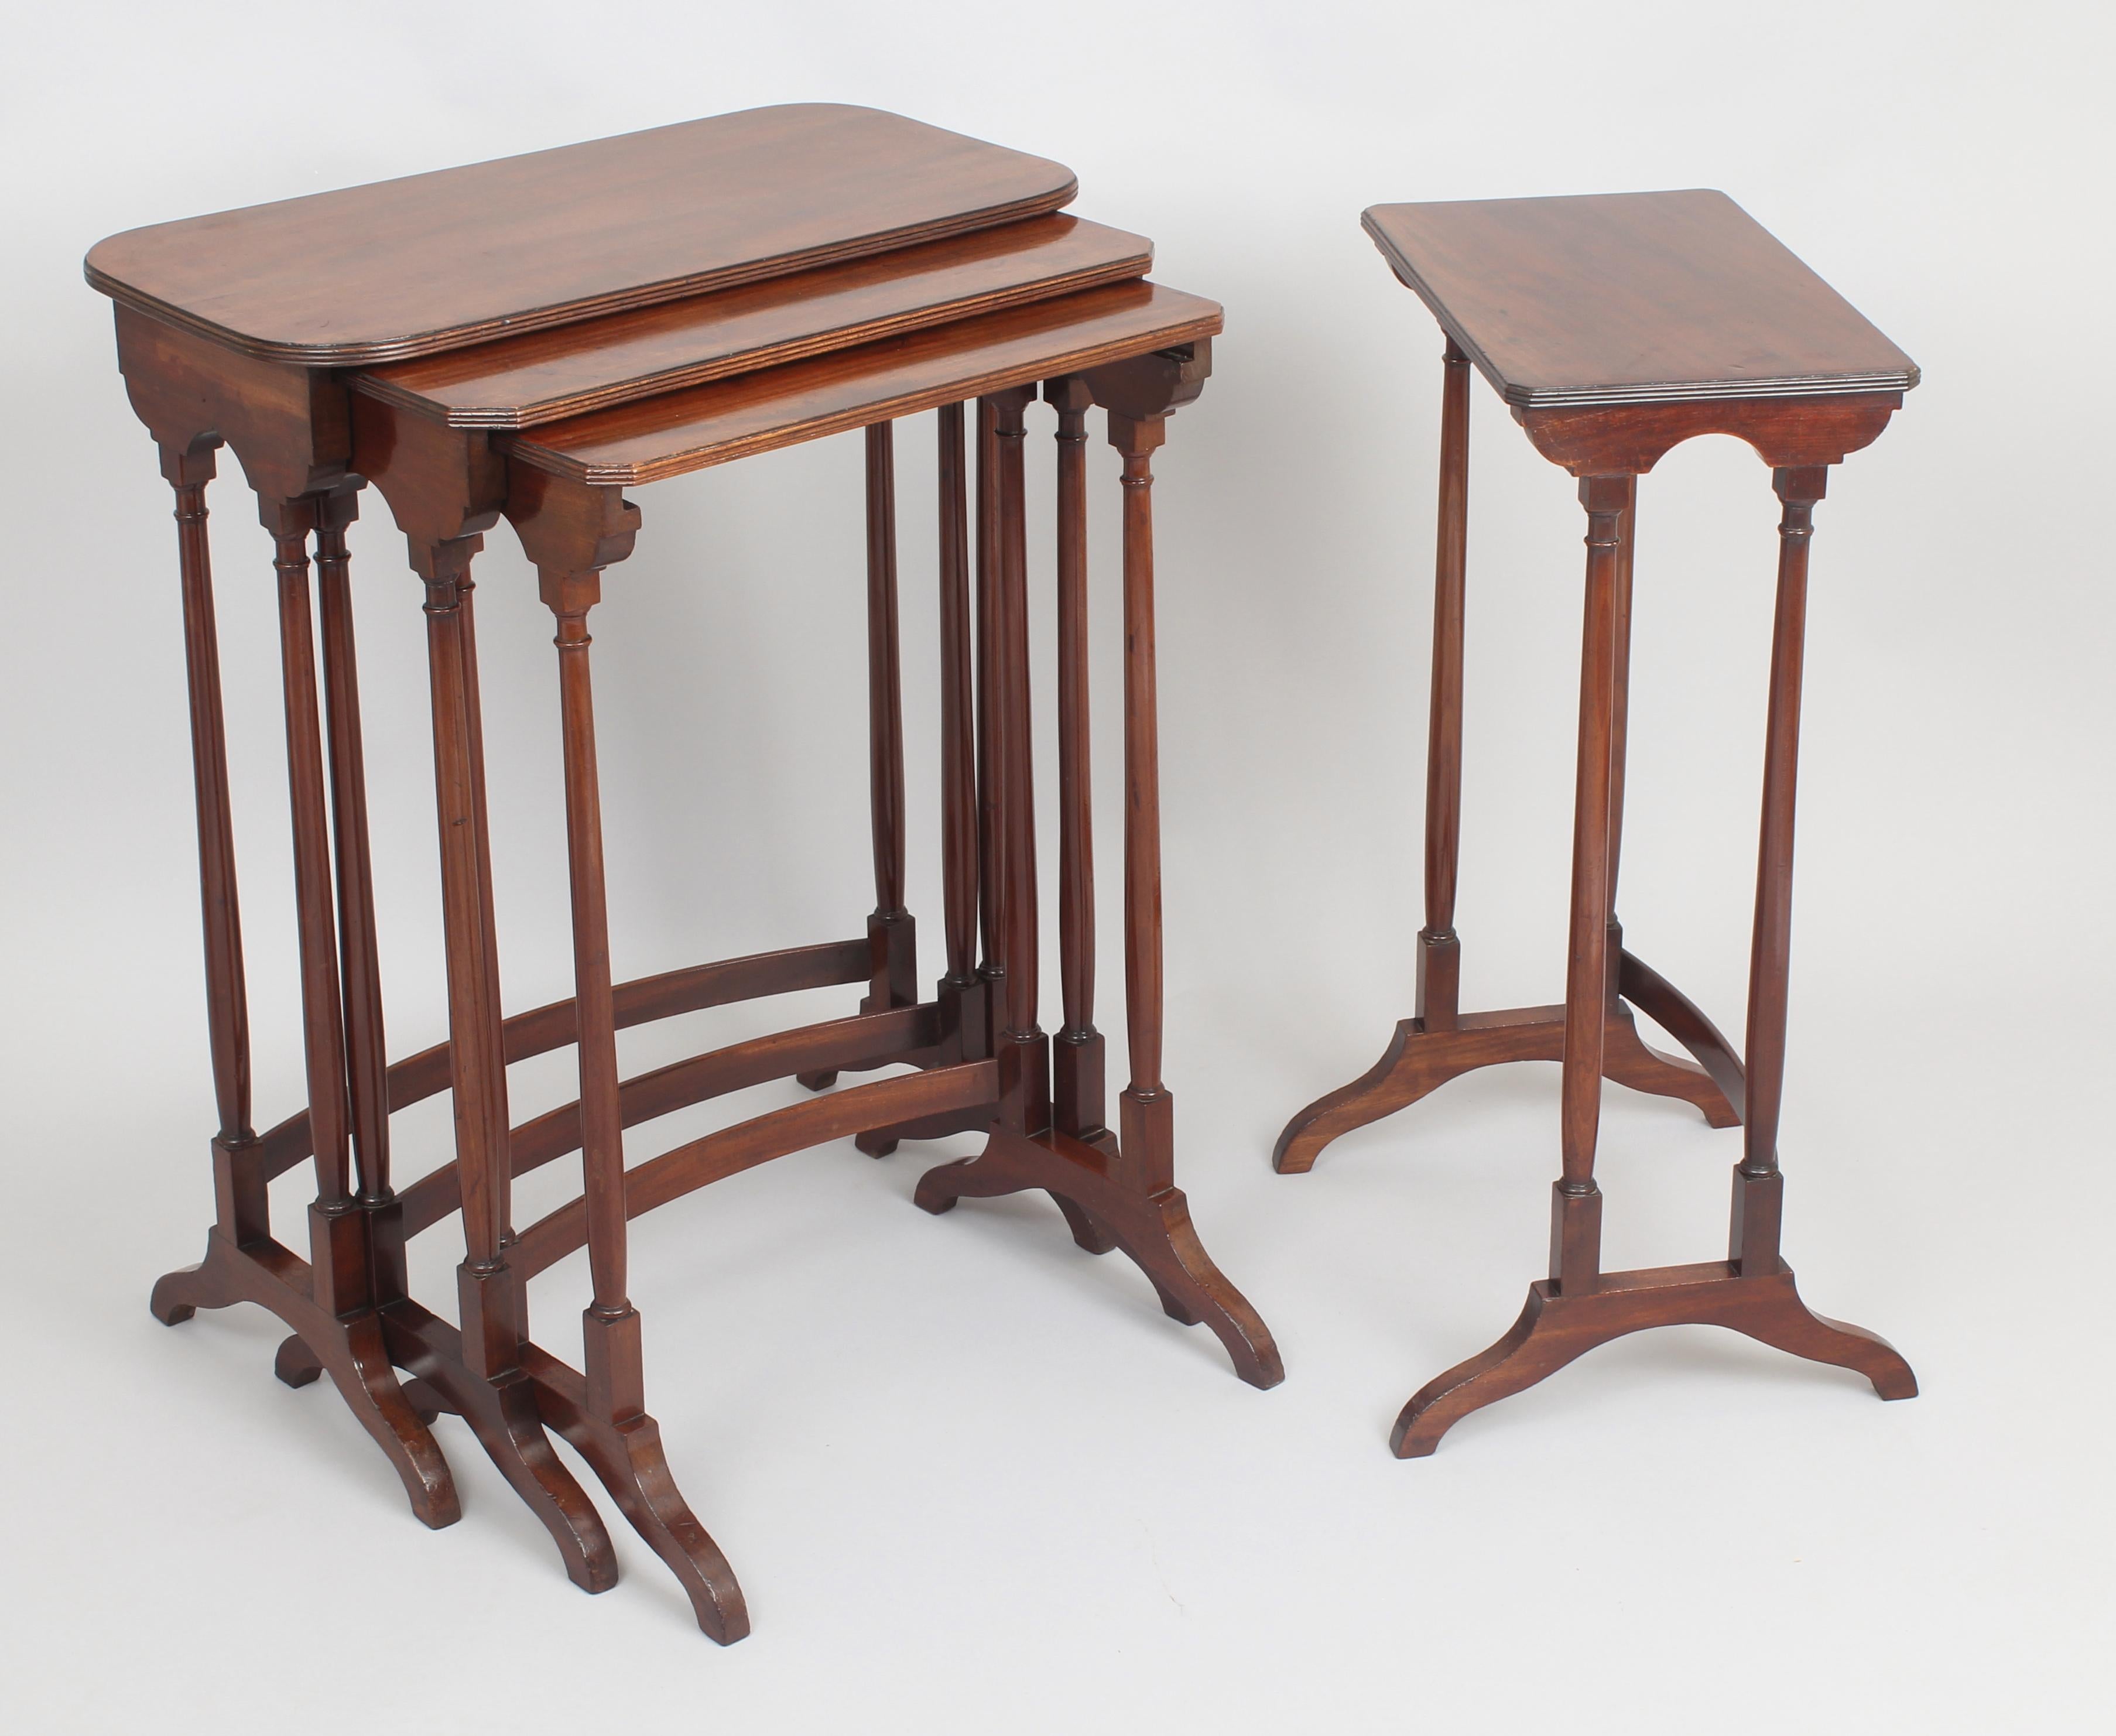 Particularly Fine George III Period Mahogany Set of Quartetto Tables In Good Condition For Sale In Cambridge, GB